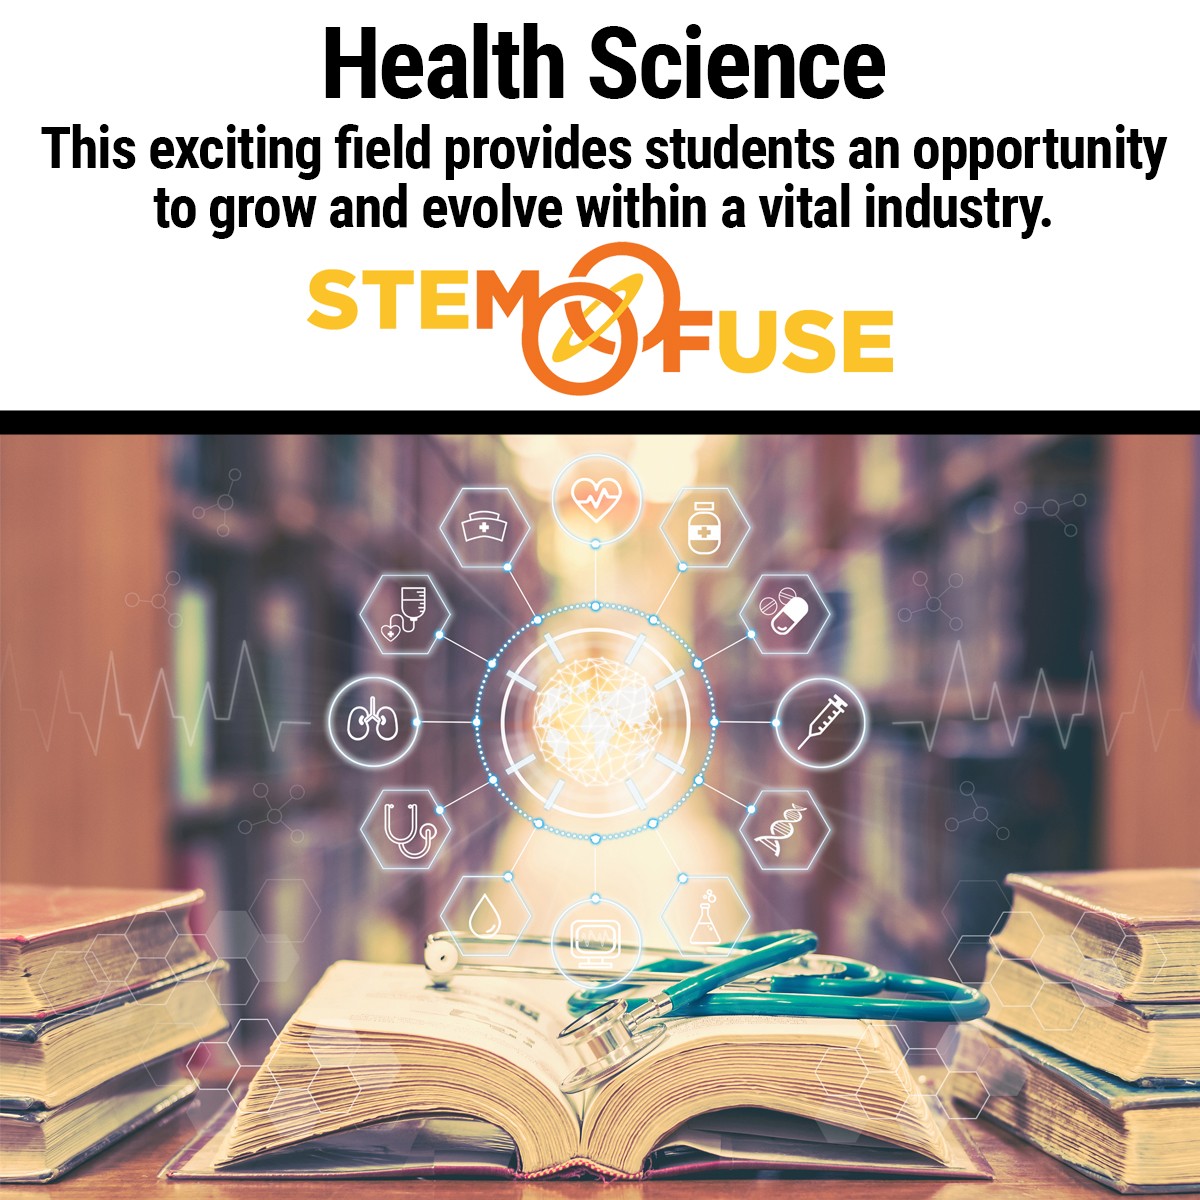 Explore New Possibilities! Unlock your students' potential with STEM Fuse's Health Science CTE Pathway! From ground-breaking research to creating a healthier world, learn how to make a difference! https://t.co/IkxgYpRHBk #CTEPathways #HealthScience #Innovation #CareerExploration https://t.co/a5PbEk7Asp